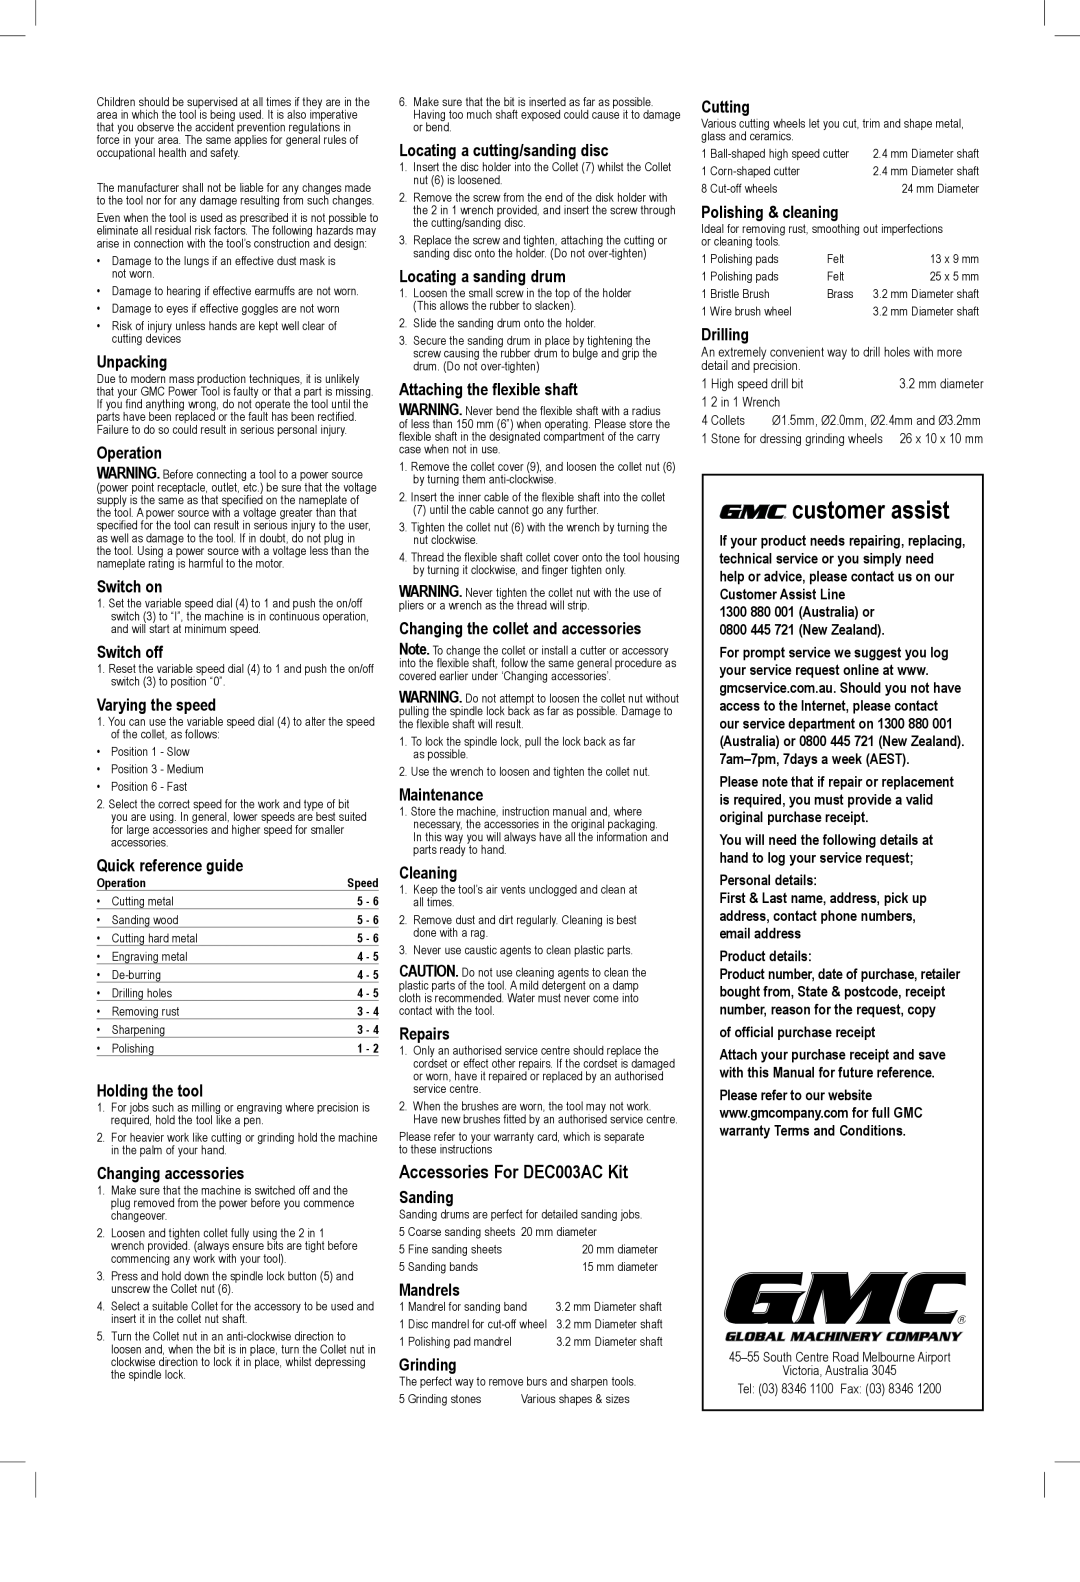 Global Machinery Company warranty customer assist, Accessories For DEC003AC Kit 